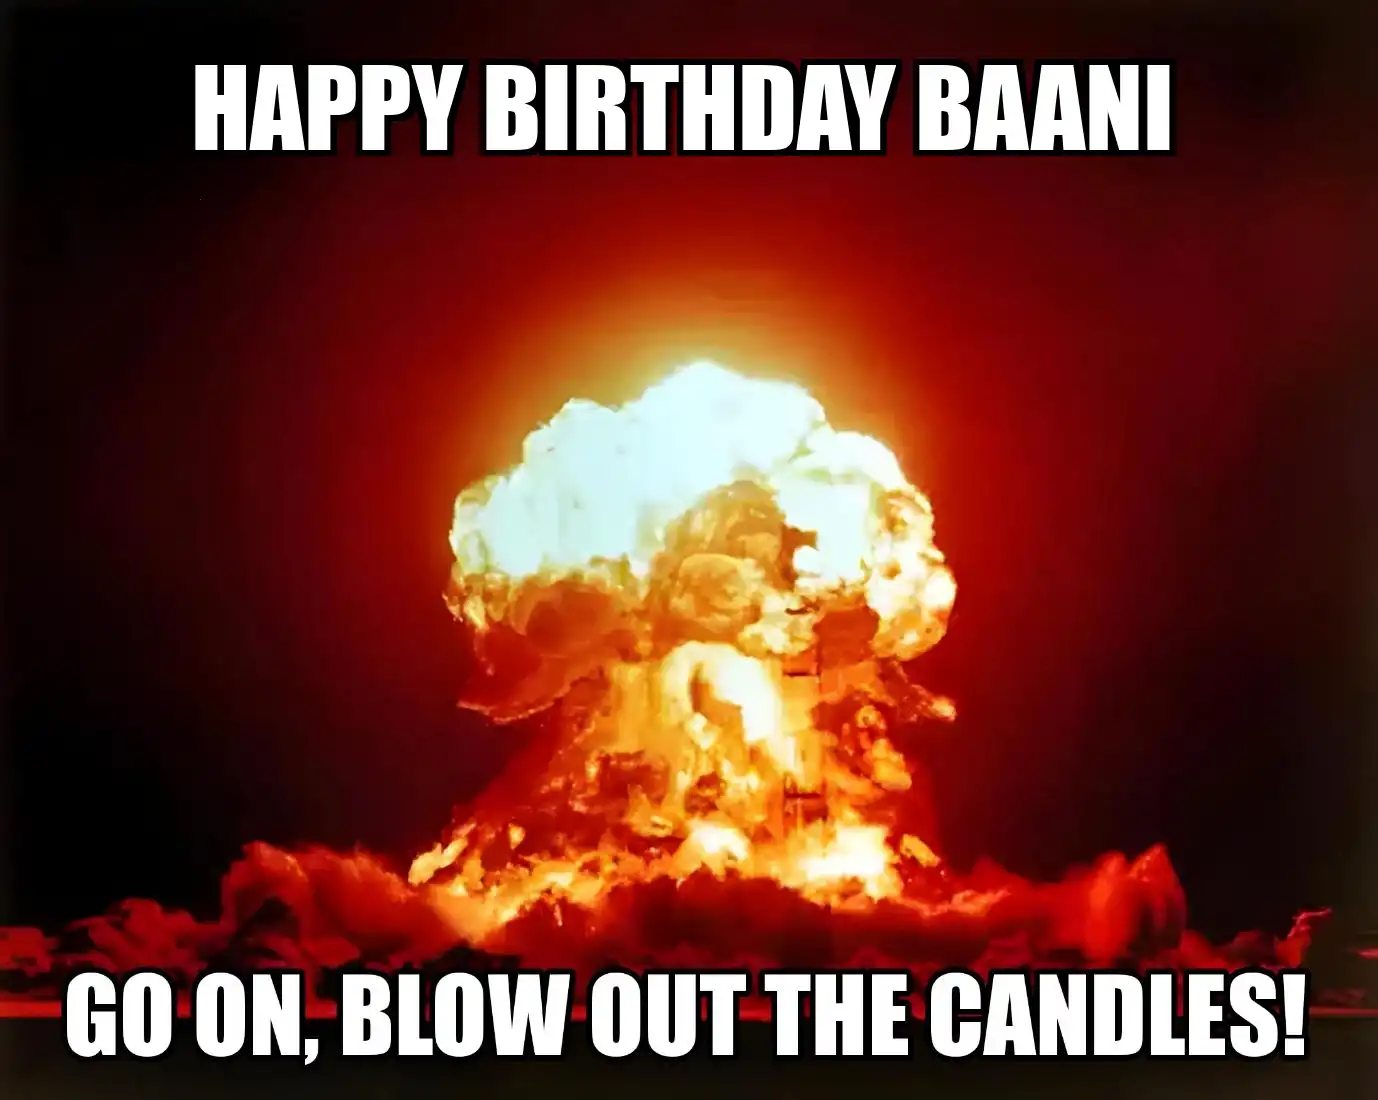 Happy Birthday Baani Go On Blow Out The Candles Meme